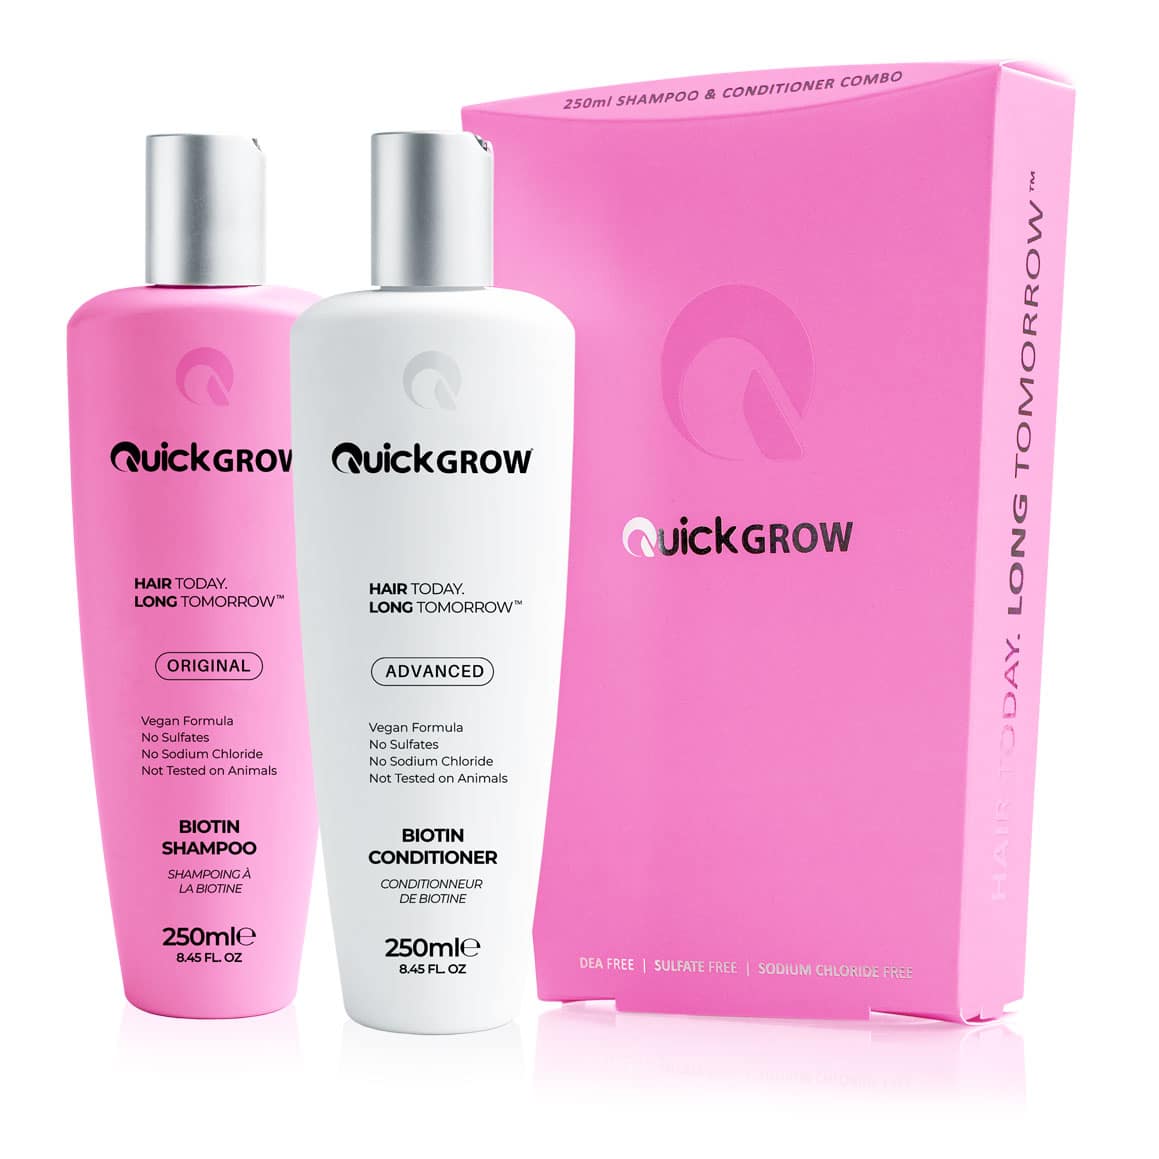 A pink box with a bottle of Quick Grow -250ml Combo Pack Shampoo & Conditioner.